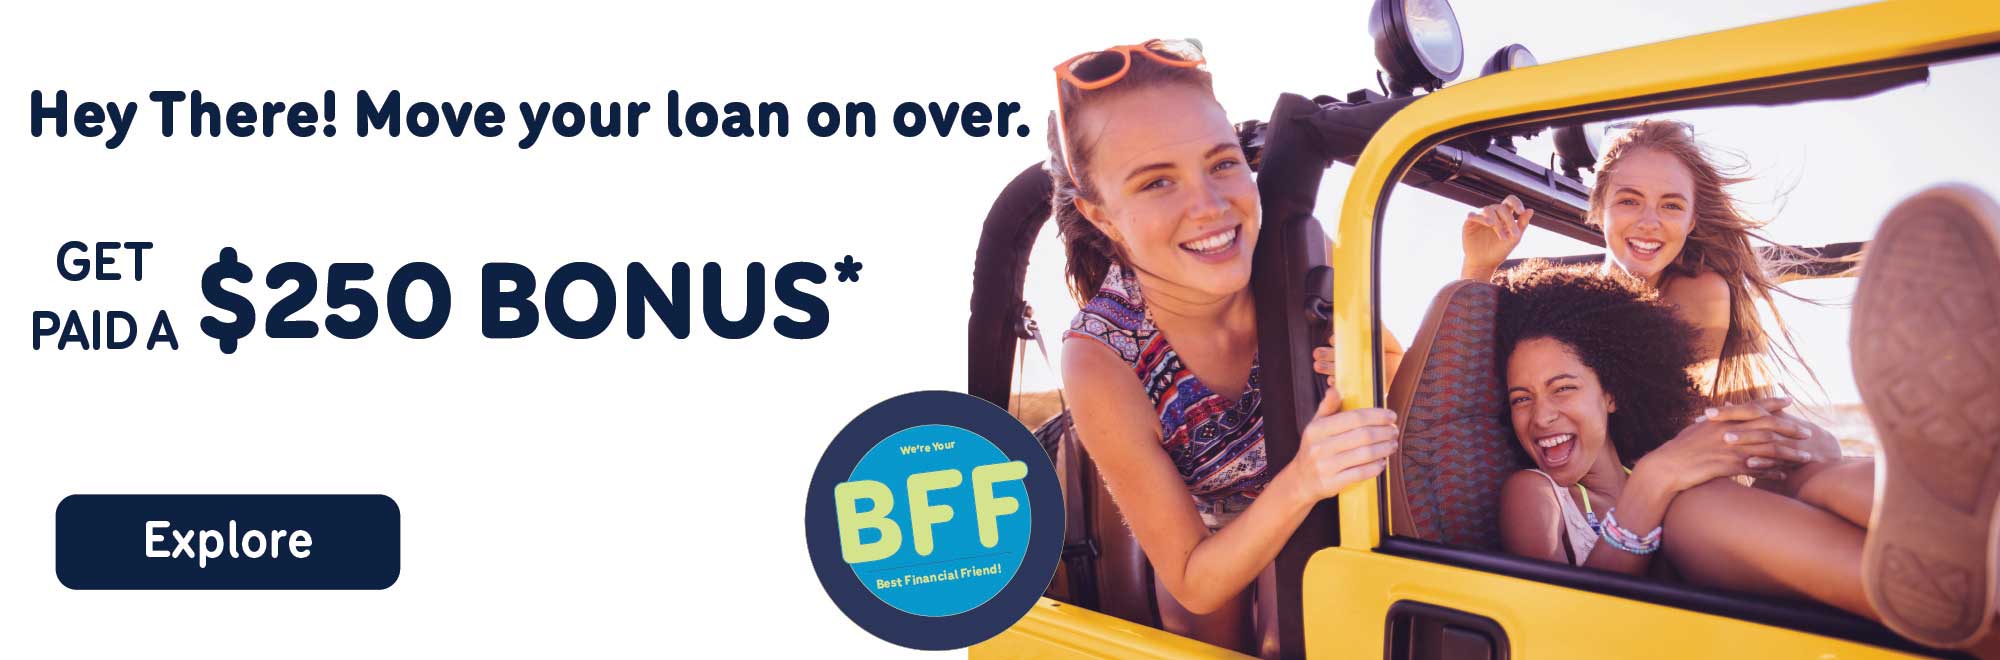 Hey there! Move your loan on over and get a $250 bonus